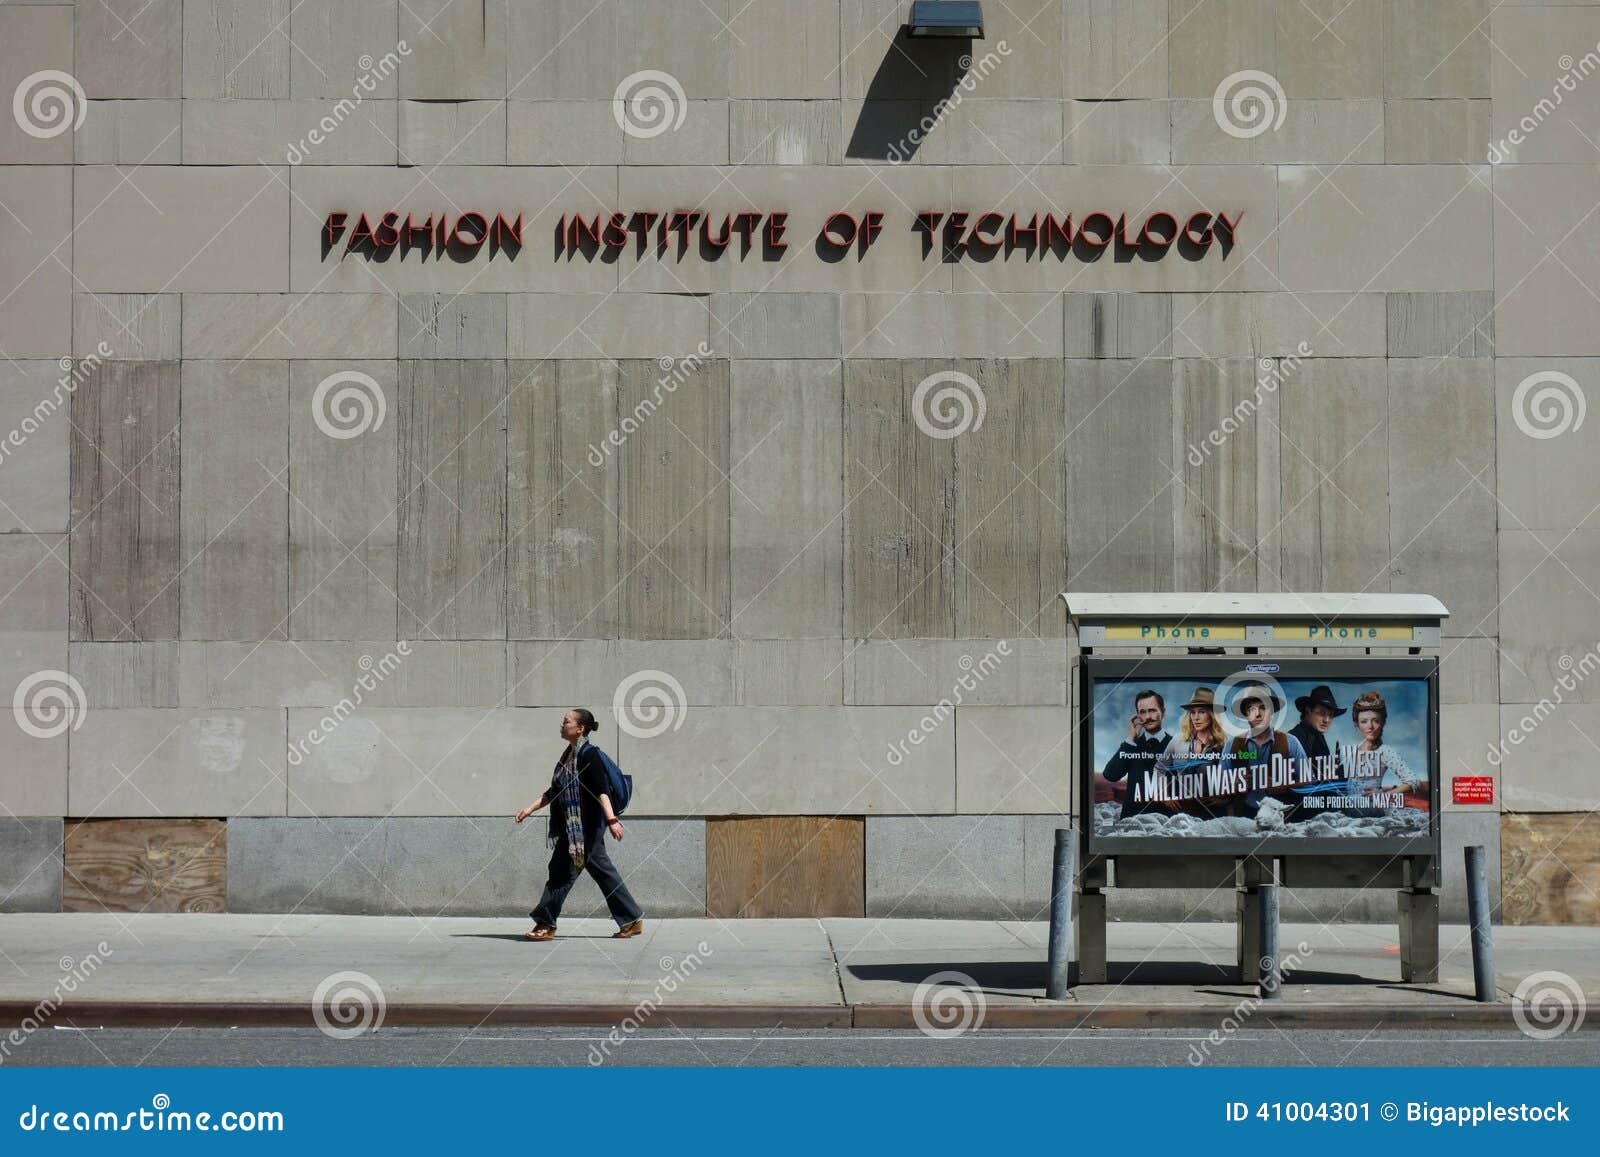 fashion institute of technology student reviews